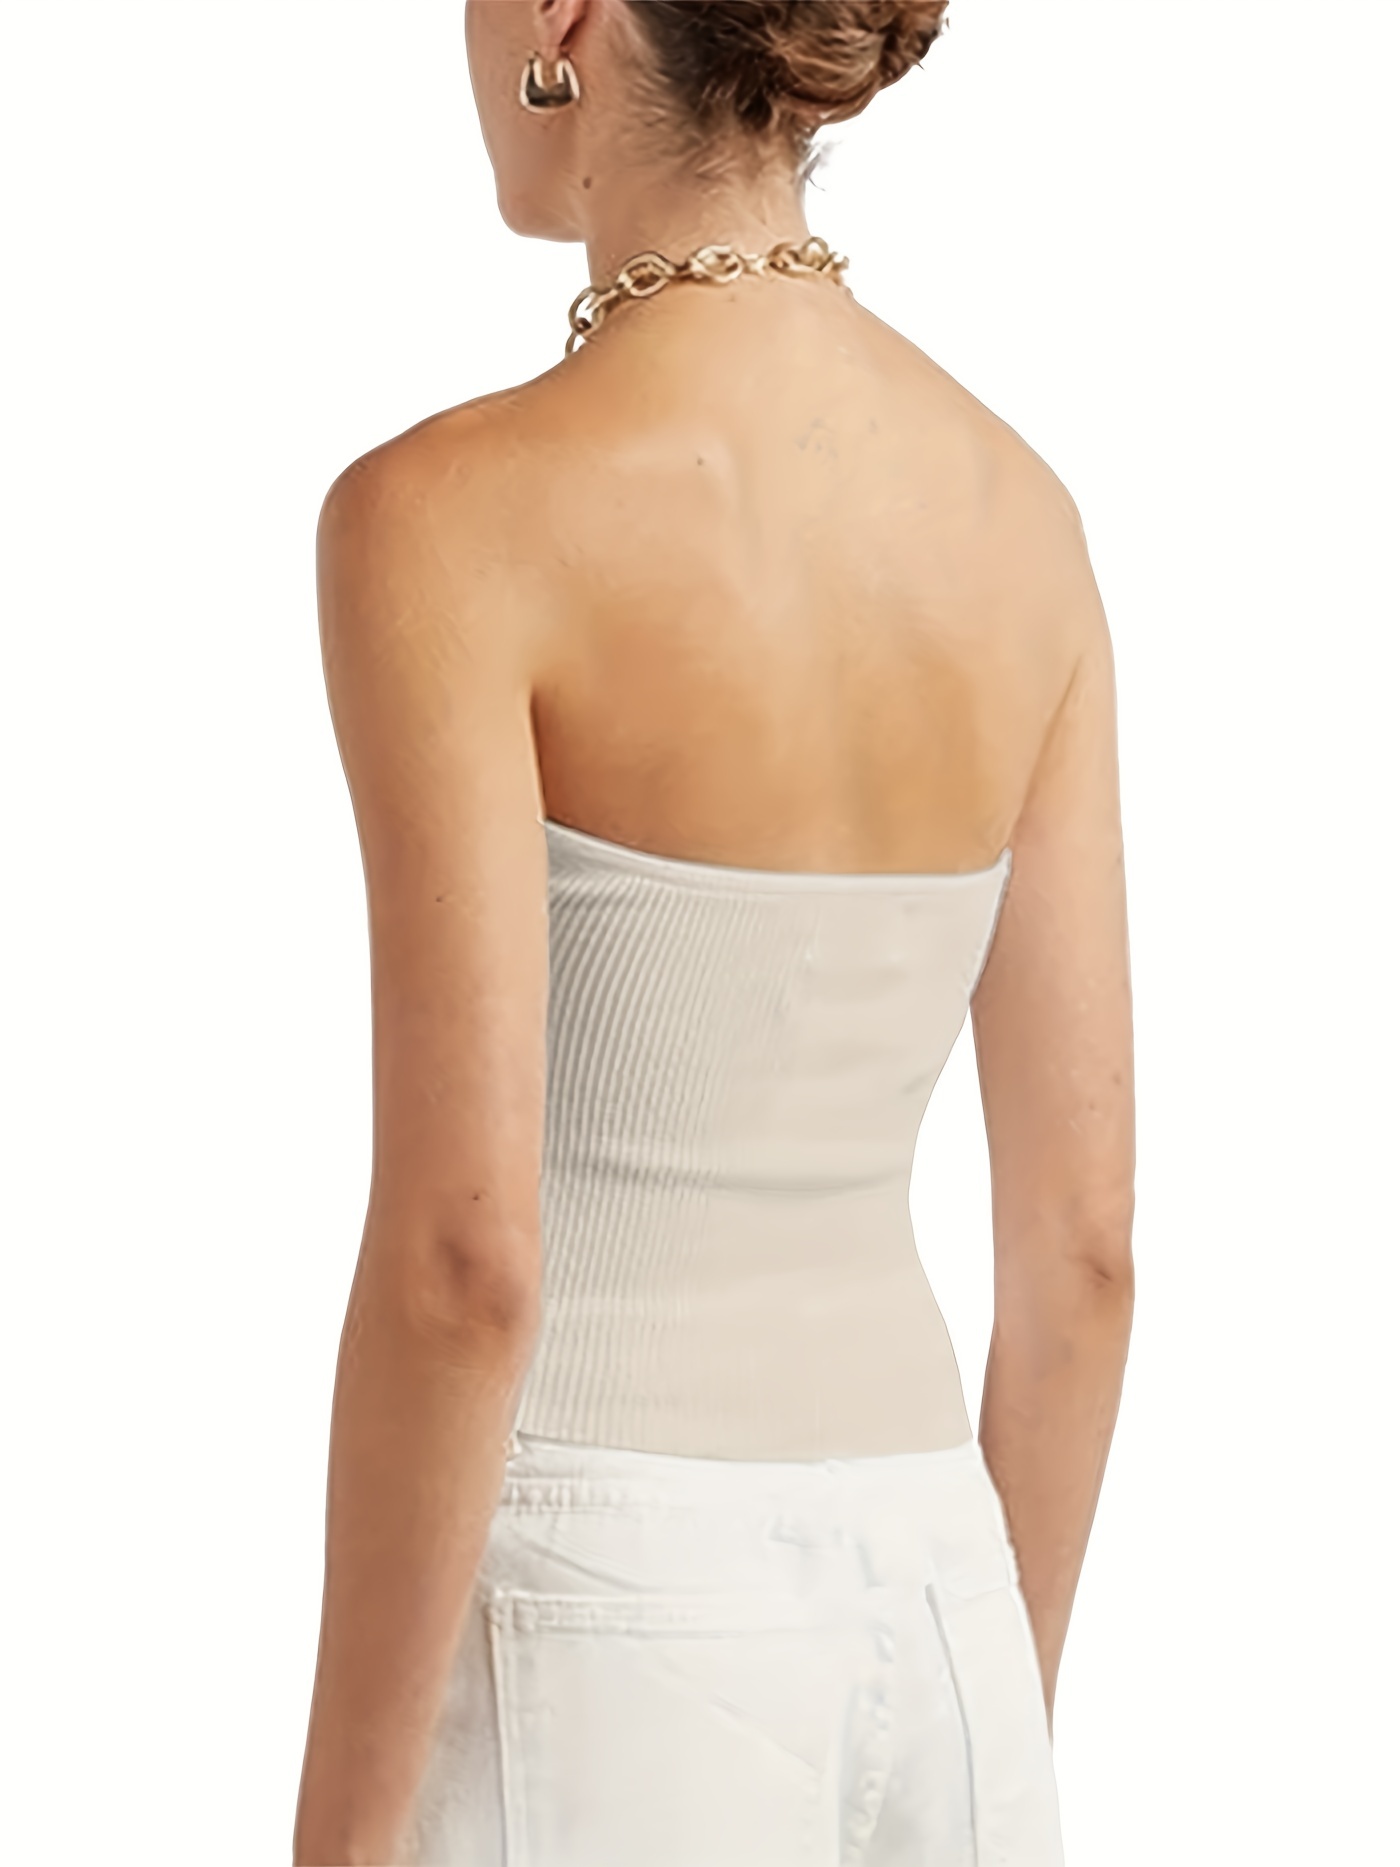  Womens Tube Tops Summer Strapless Backless Twist